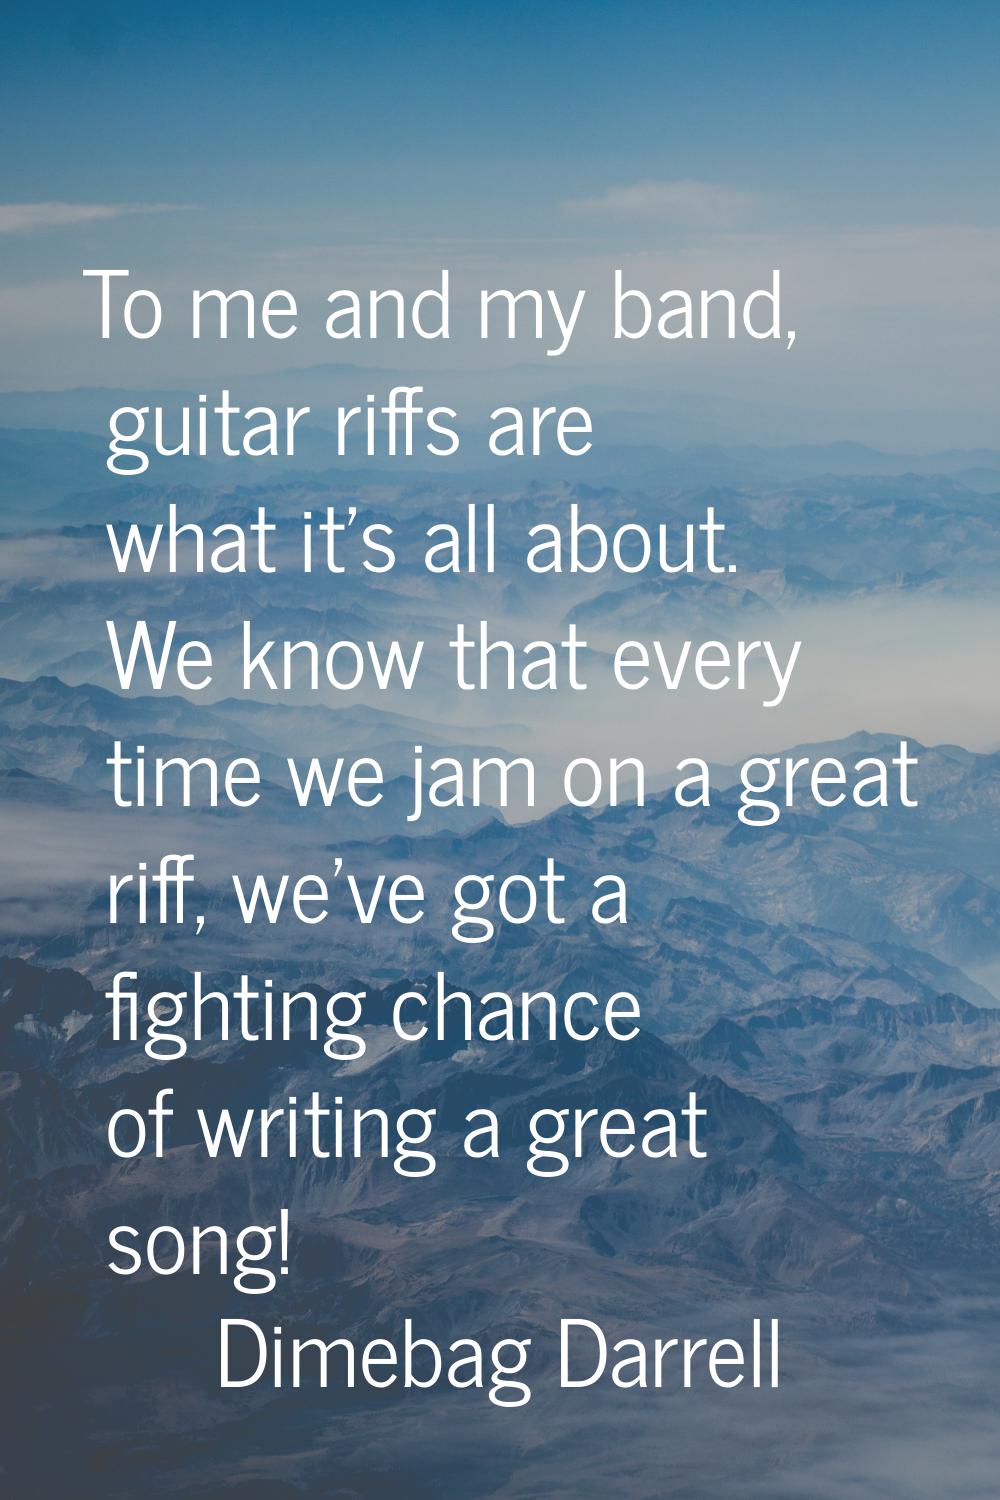 To me and my band, guitar riffs are what it's all about. We know that every time we jam on a great 